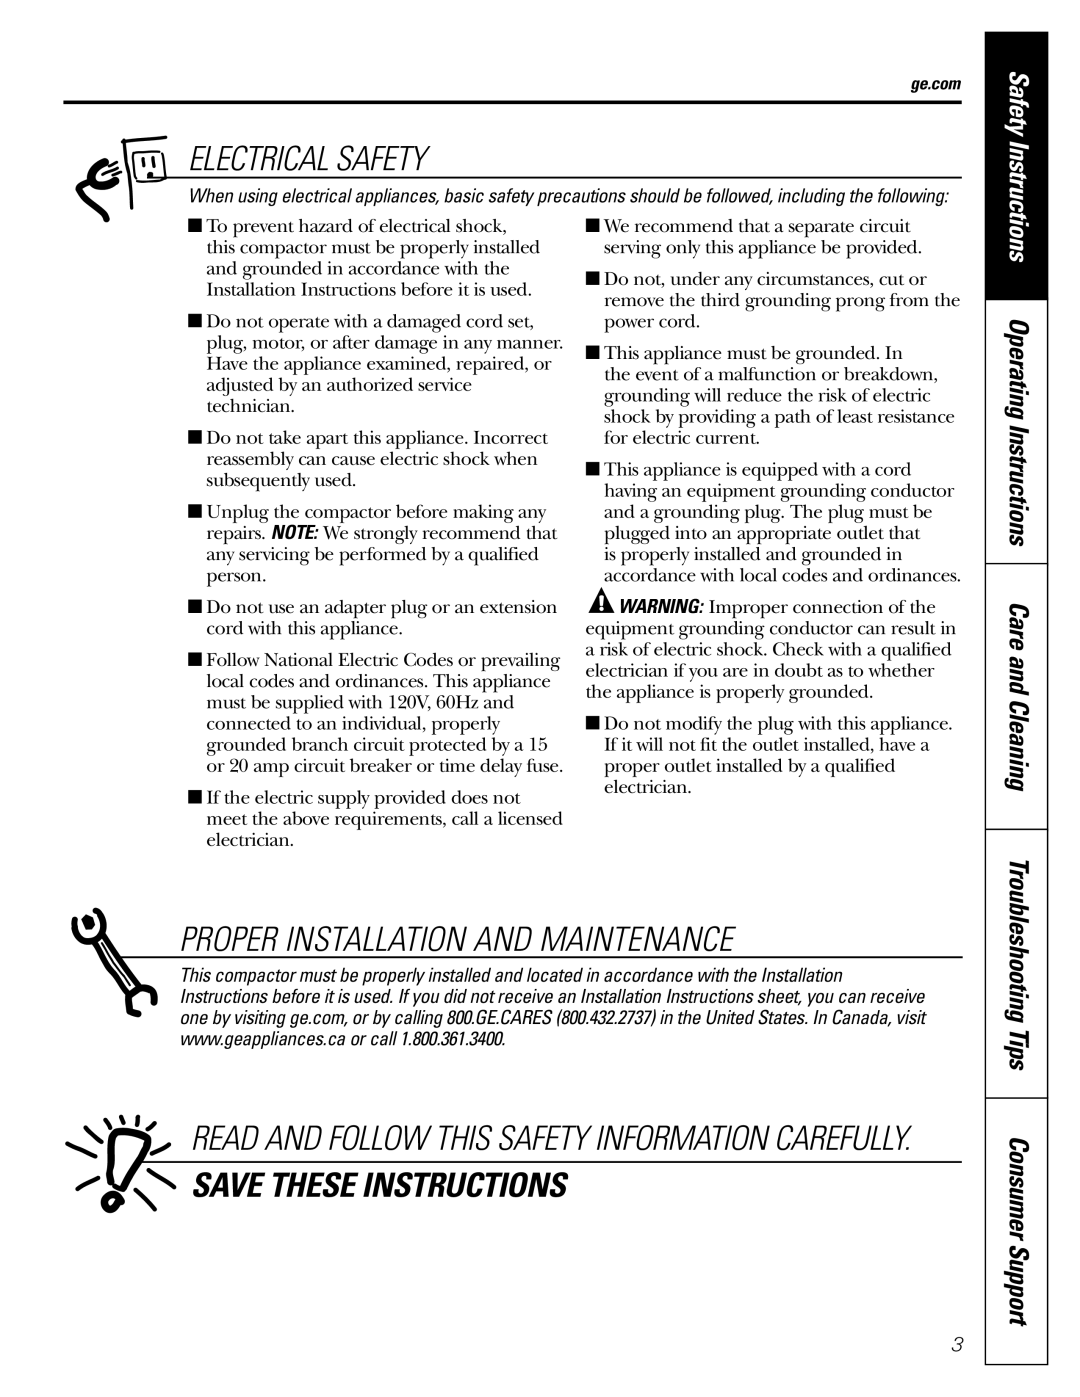 GE GCGI700, GCGI580, GCGI500 owner manual Electrical Safety, Proper Installation And Maintenance, Save These Instructions 